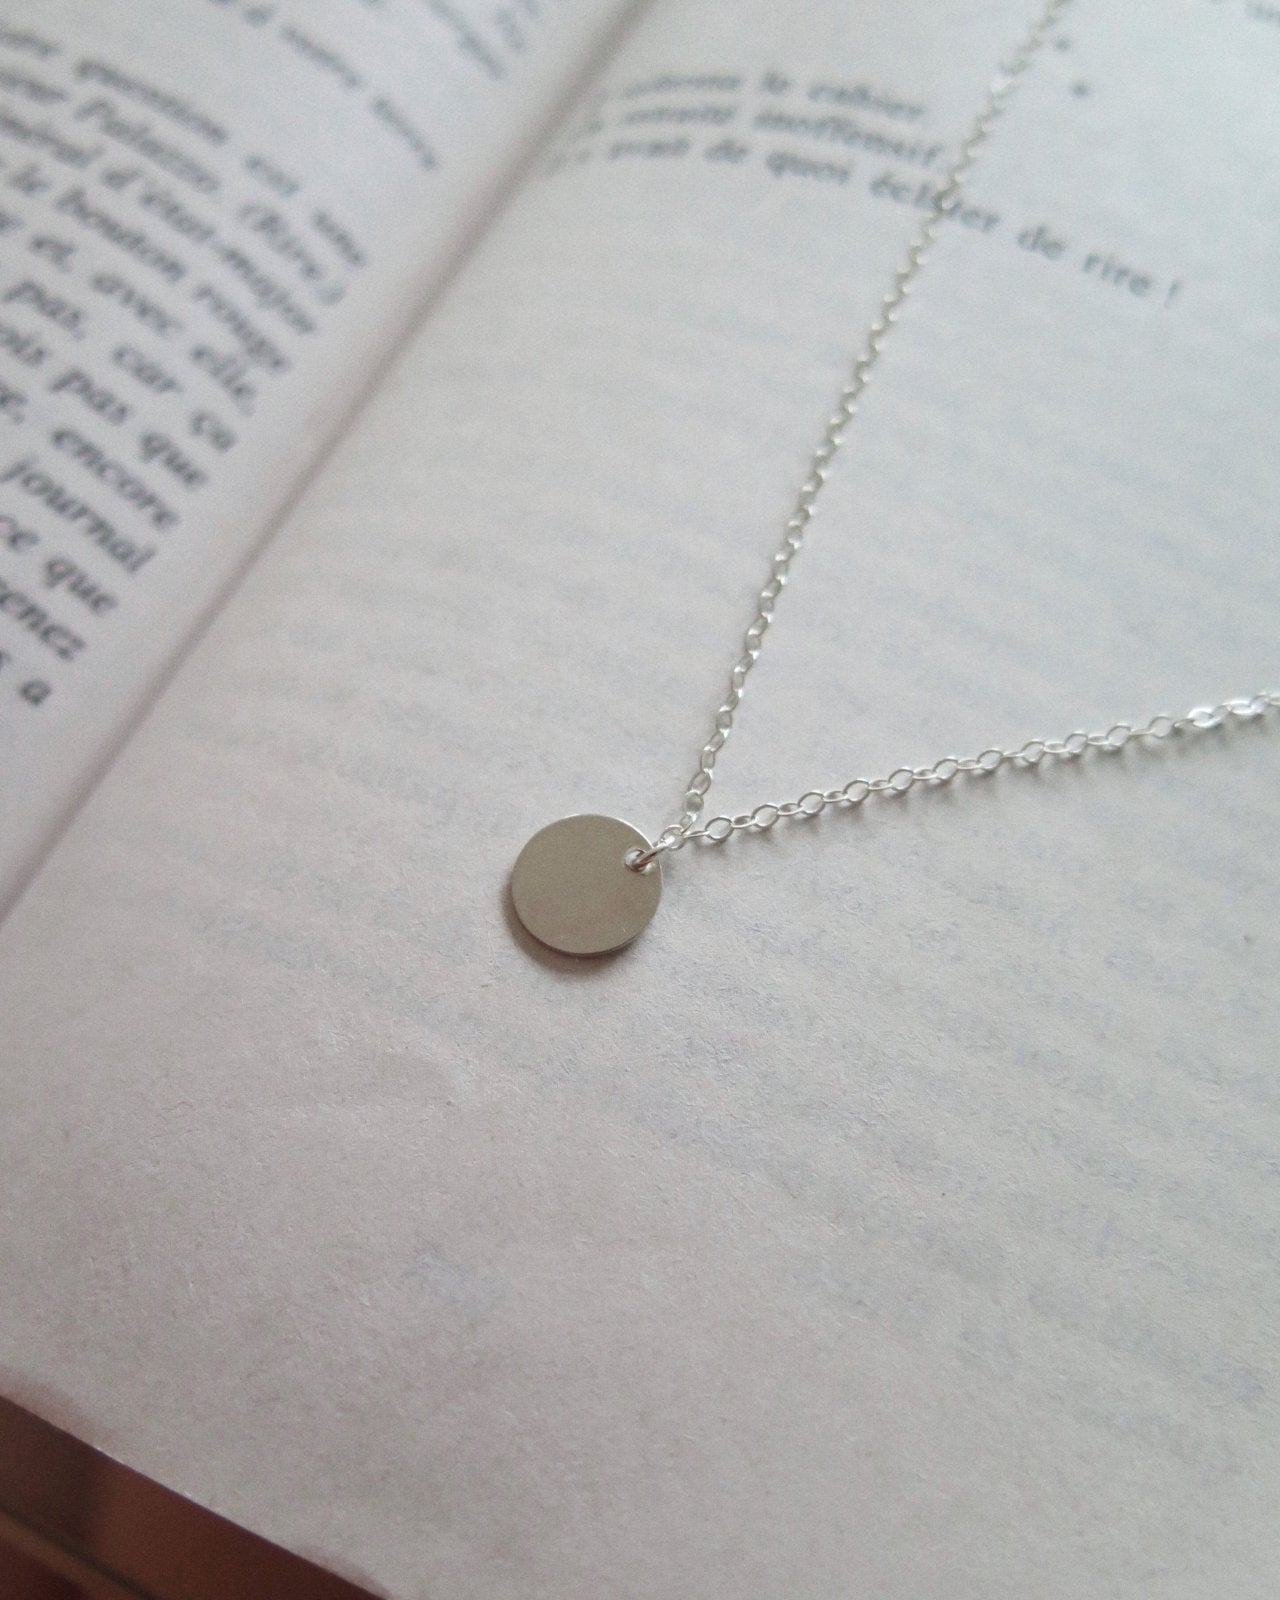 COIN NECKLACE - The Littl - 14k Yellow Gold Fill - No